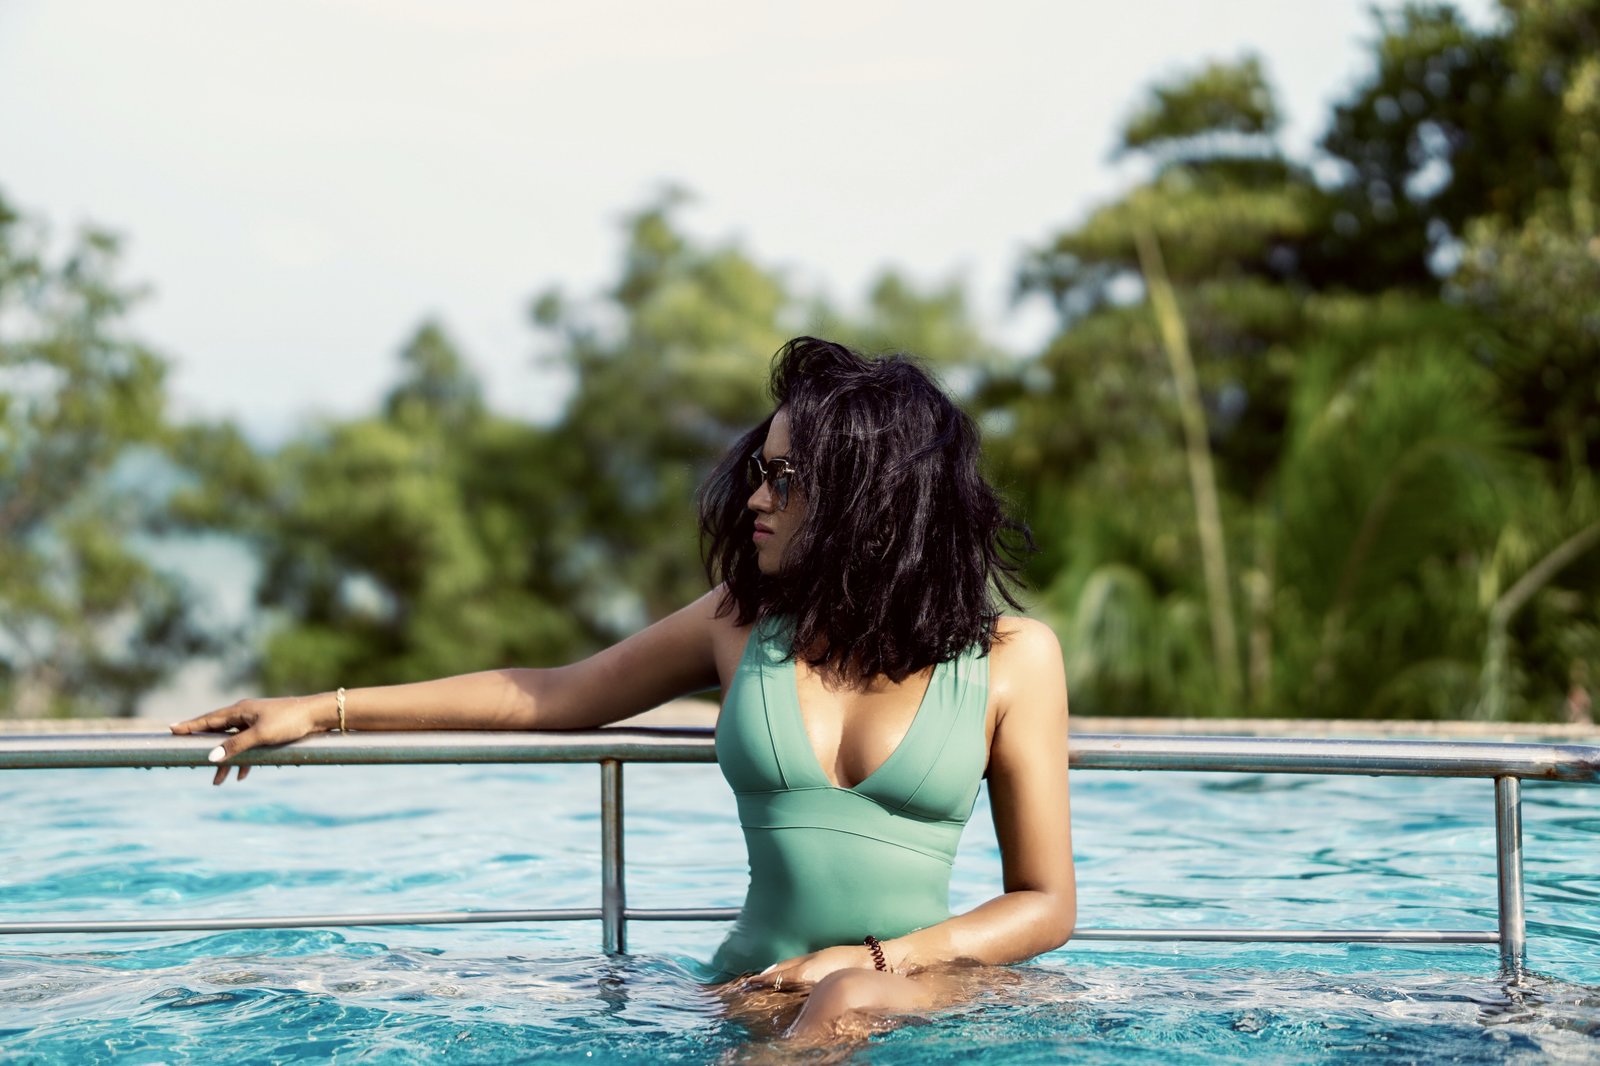 Sachini wearing a turquoise swimsuit in a swimming pool